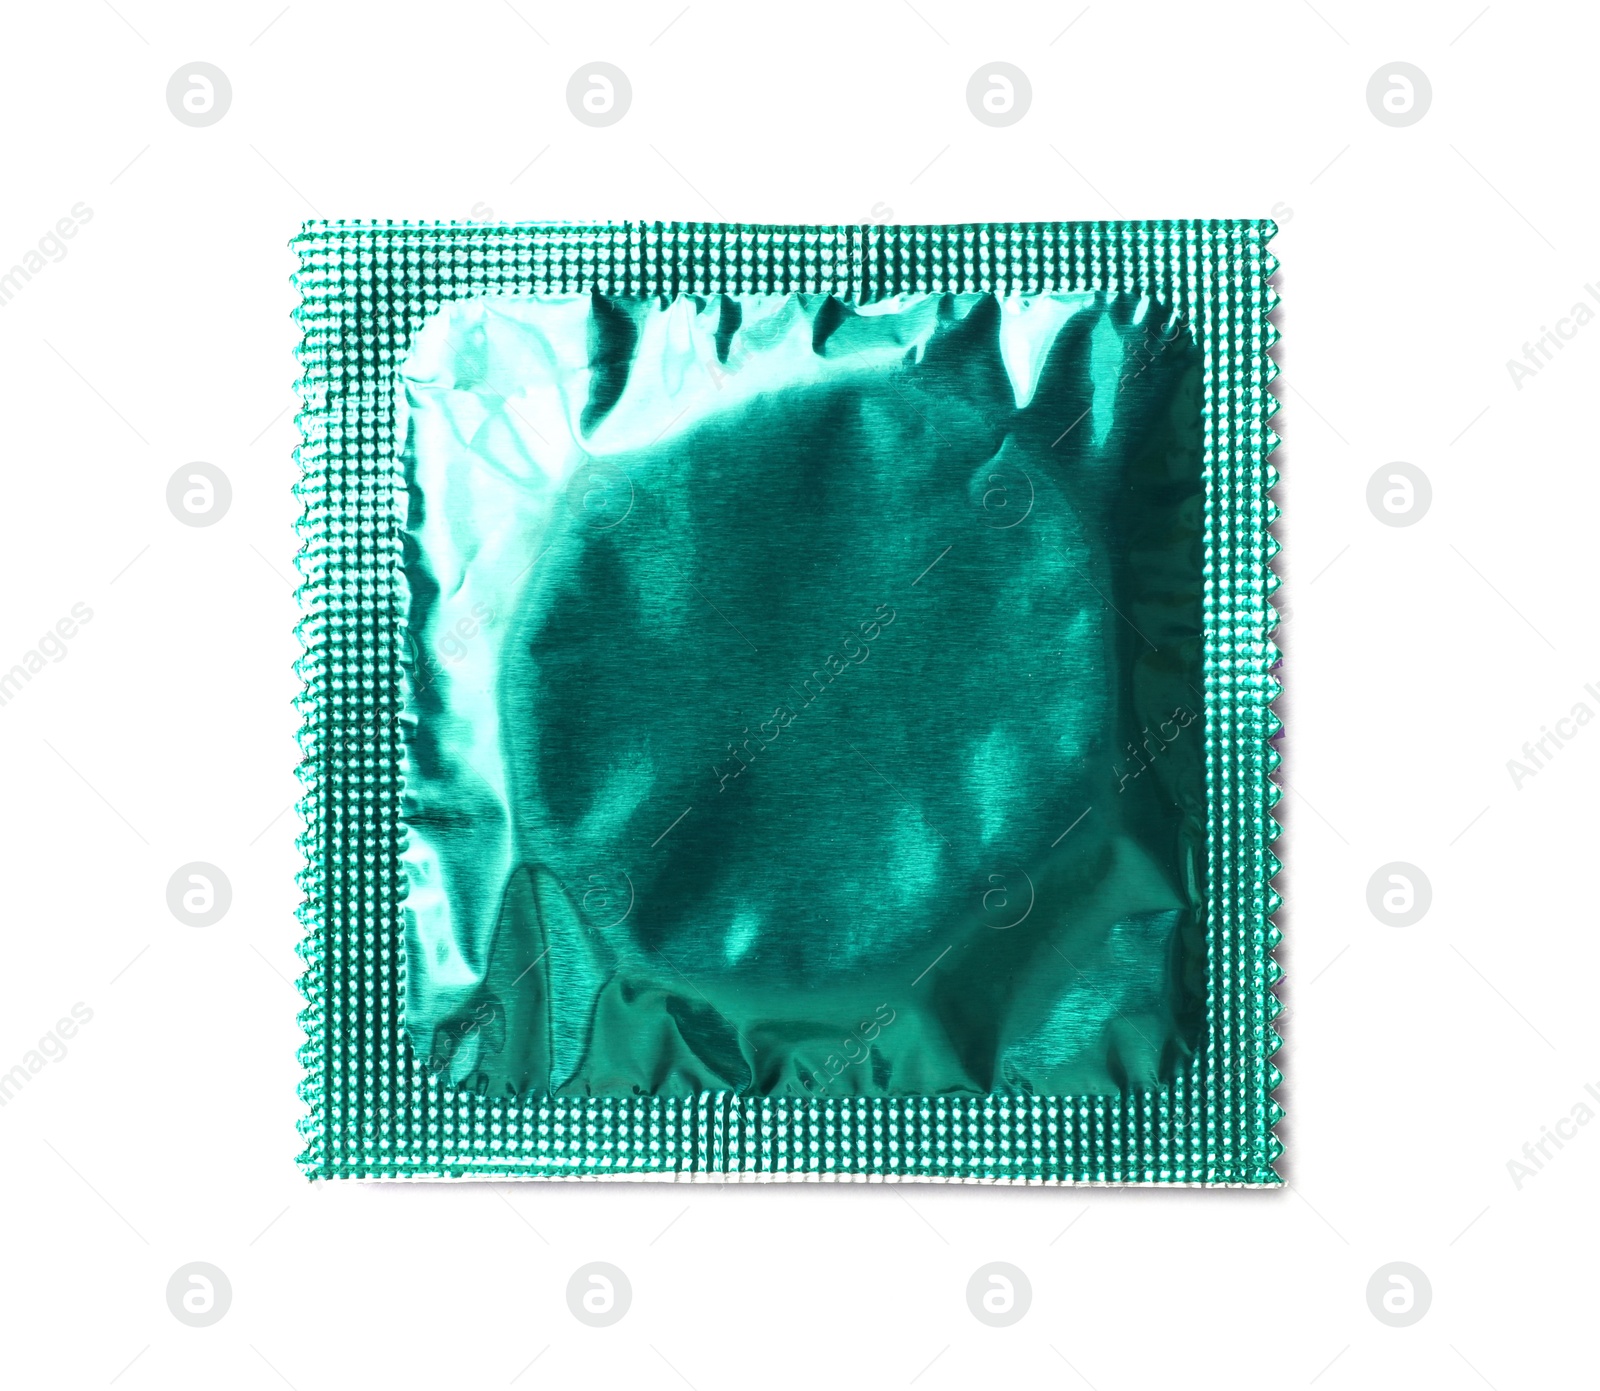 Image of Condom package on white background, top view. Safe sex